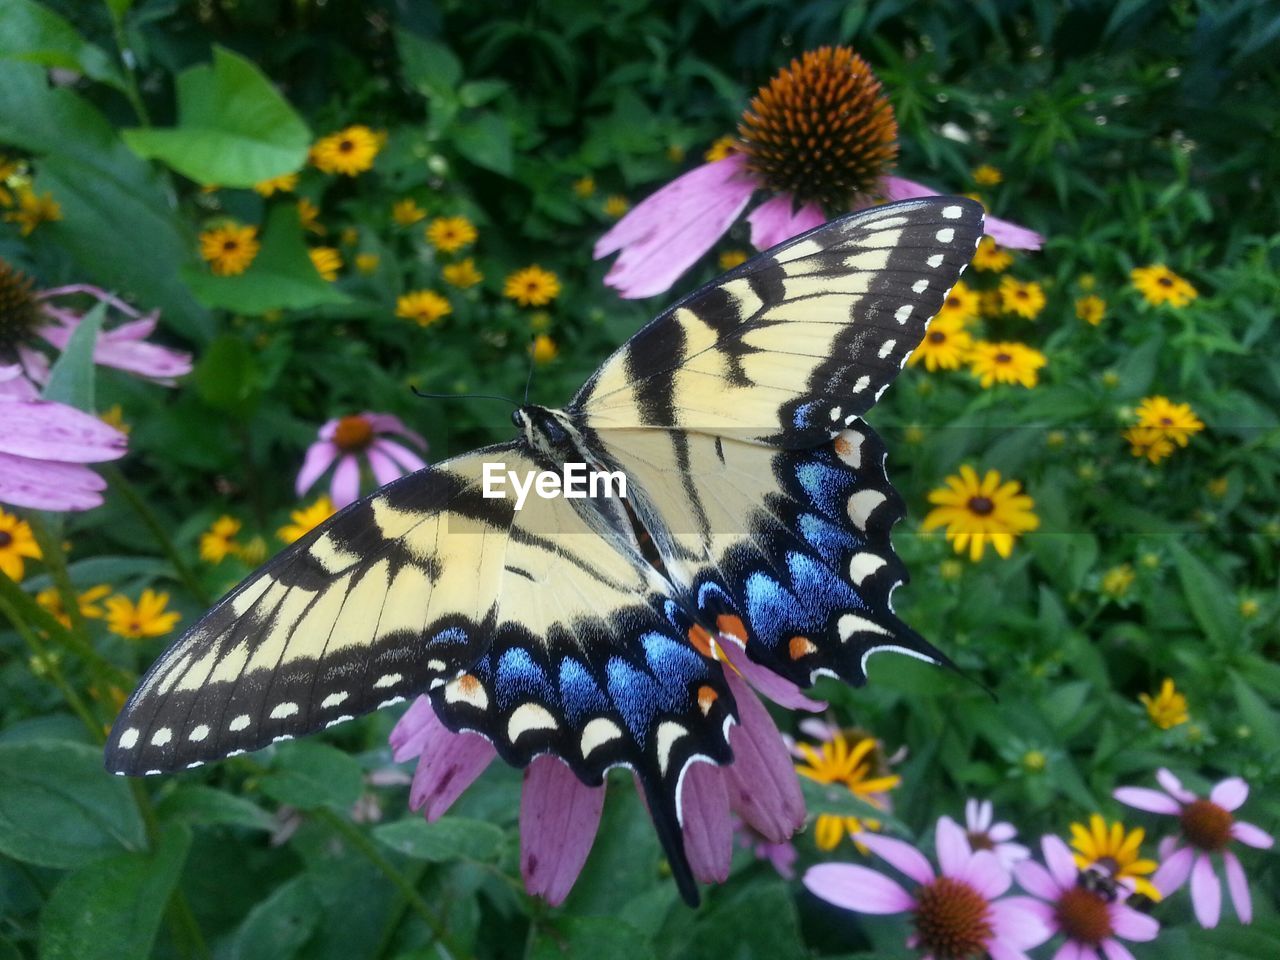 High angle view of butterfly on coneflowers in park